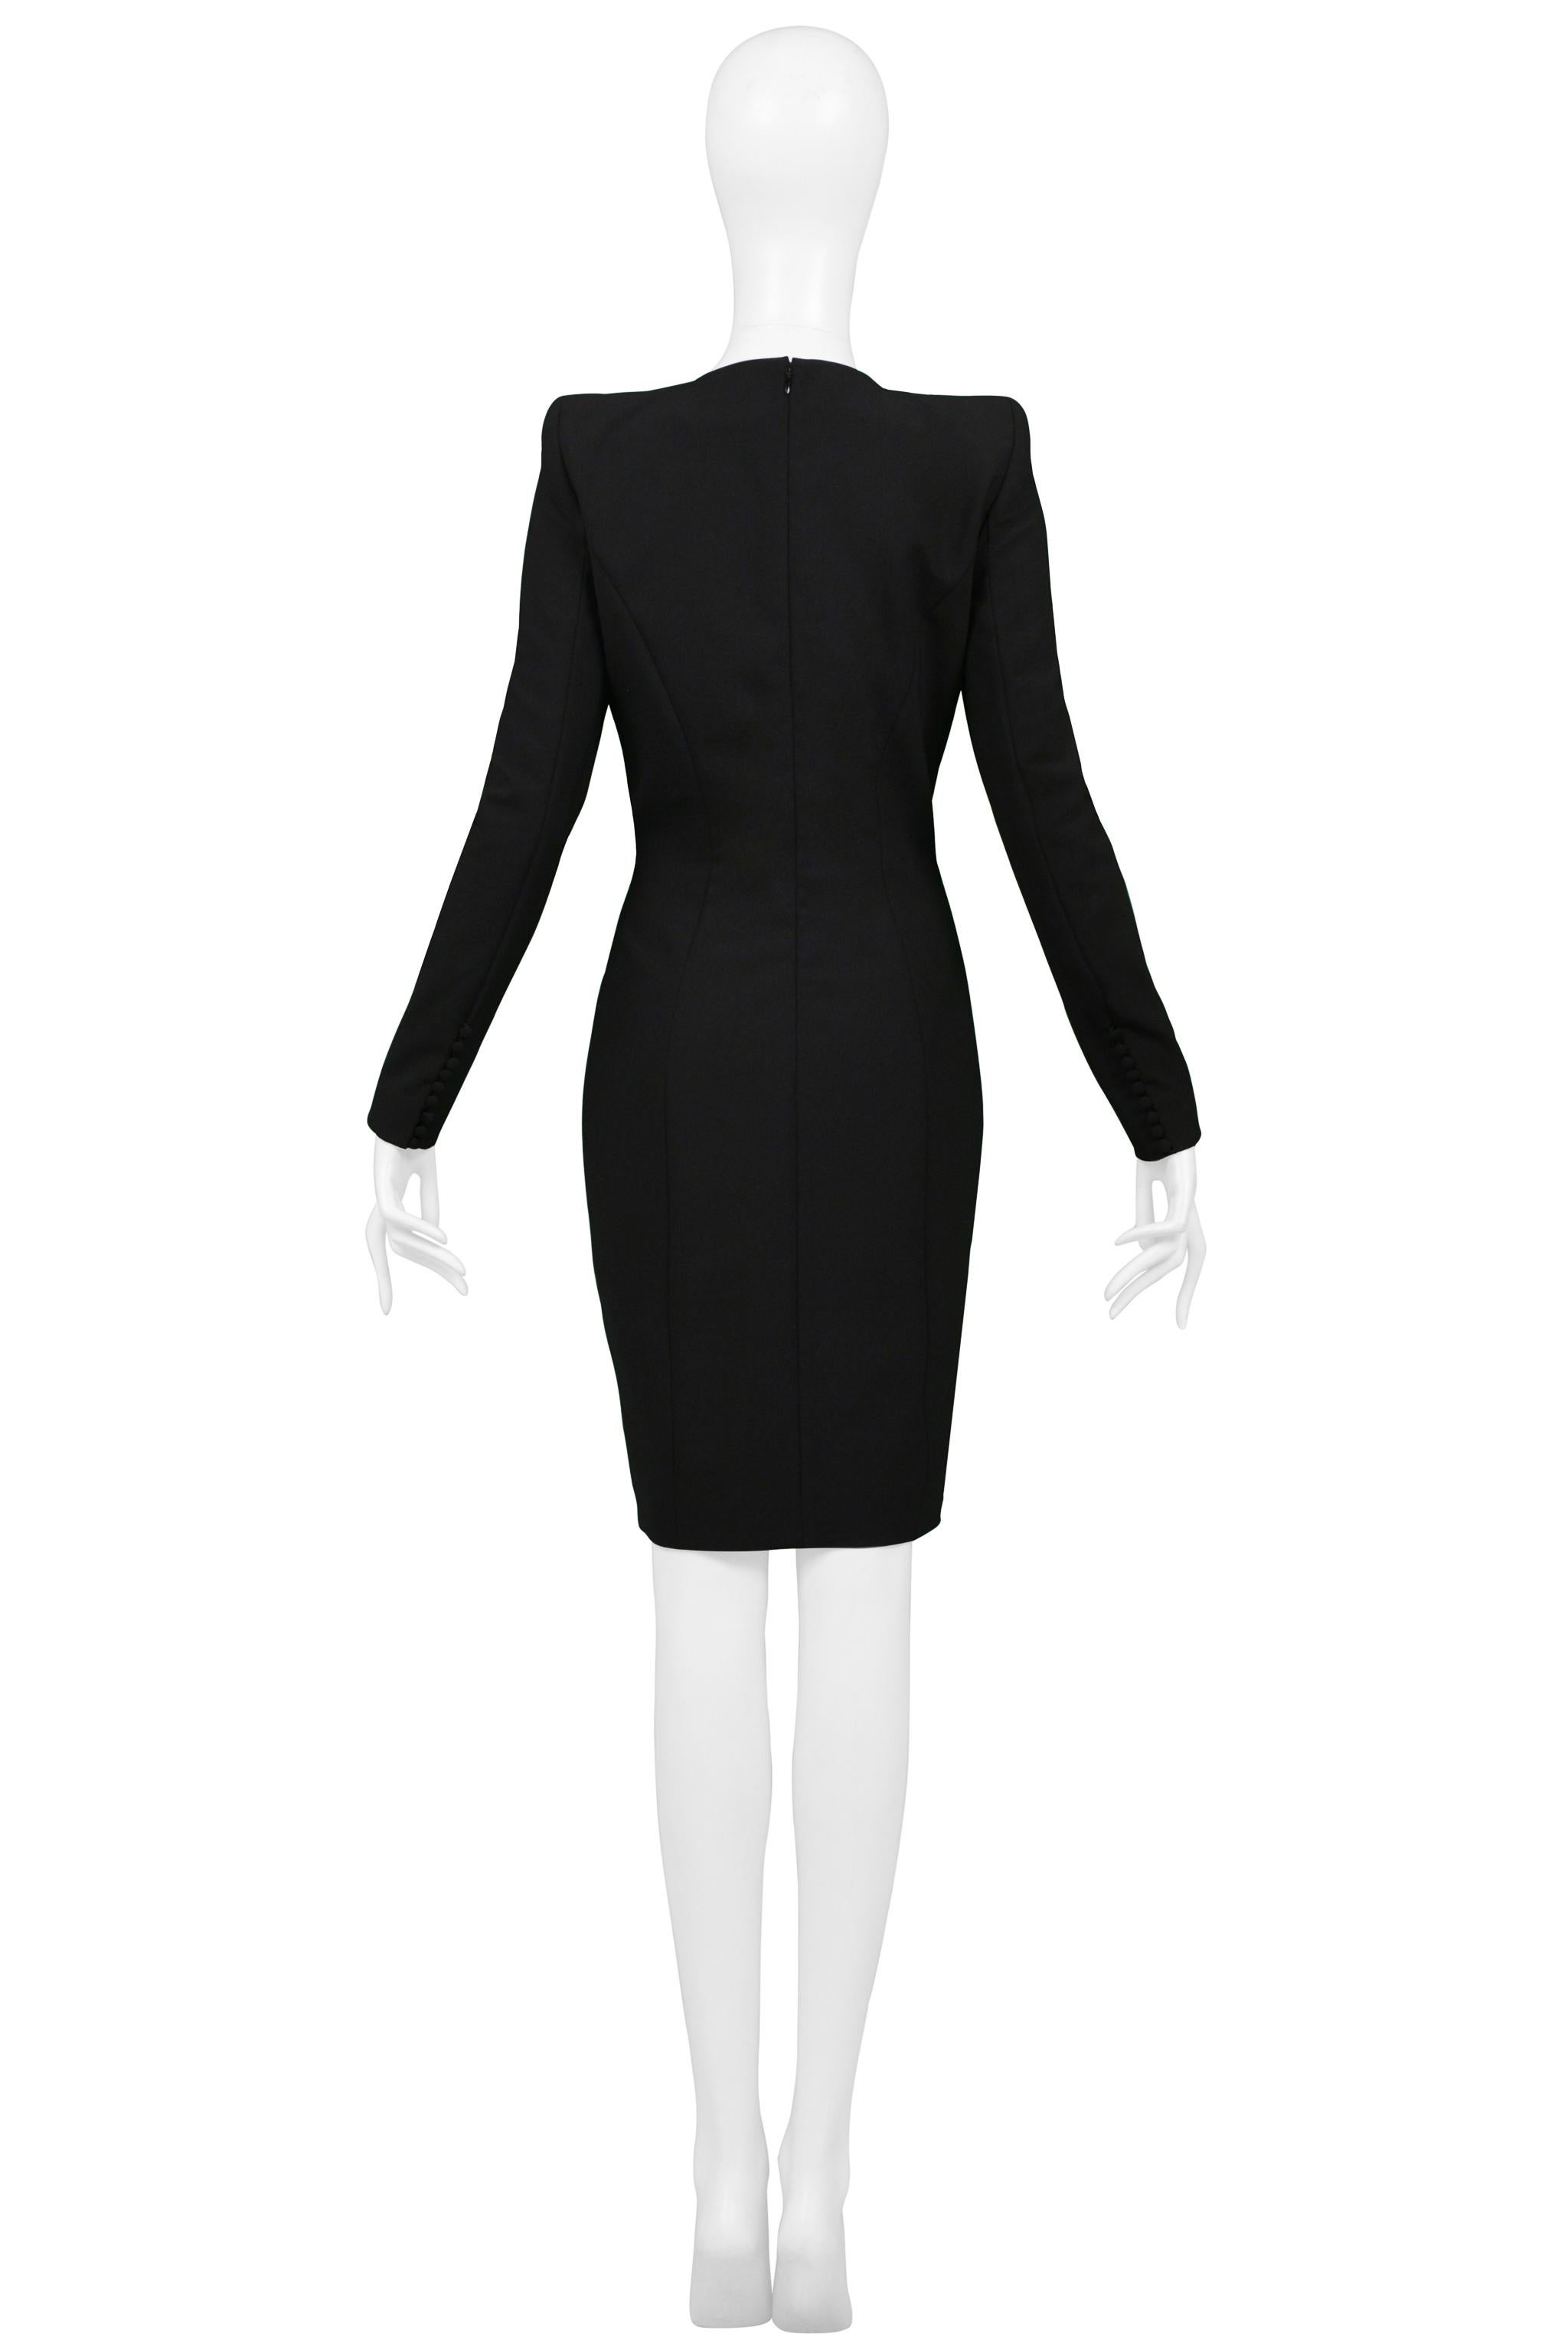 John Galliano Black Tuxedo Dress With Long Sleeves 1997 In Excellent Condition For Sale In Los Angeles, CA